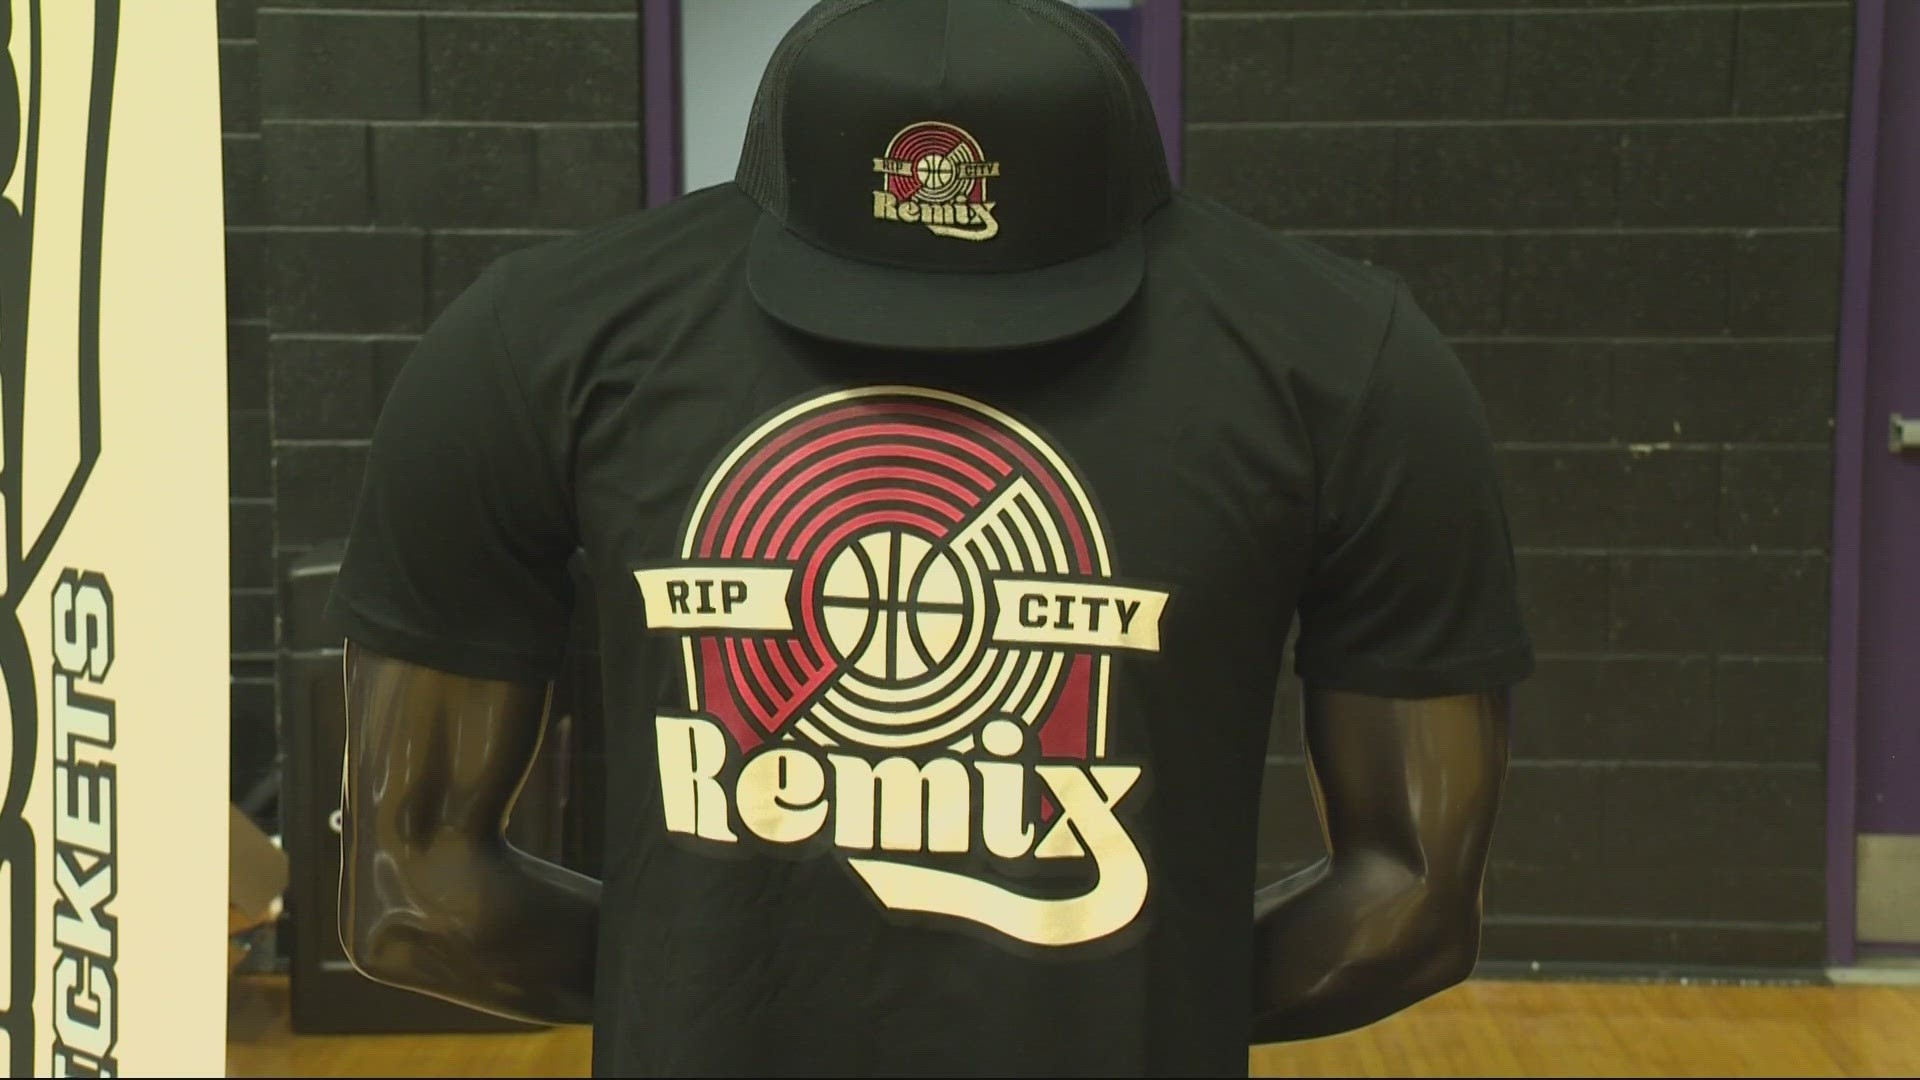 The Blazers unveiled the team's name, logo and color scheme at the University of Portland on Monday morning.